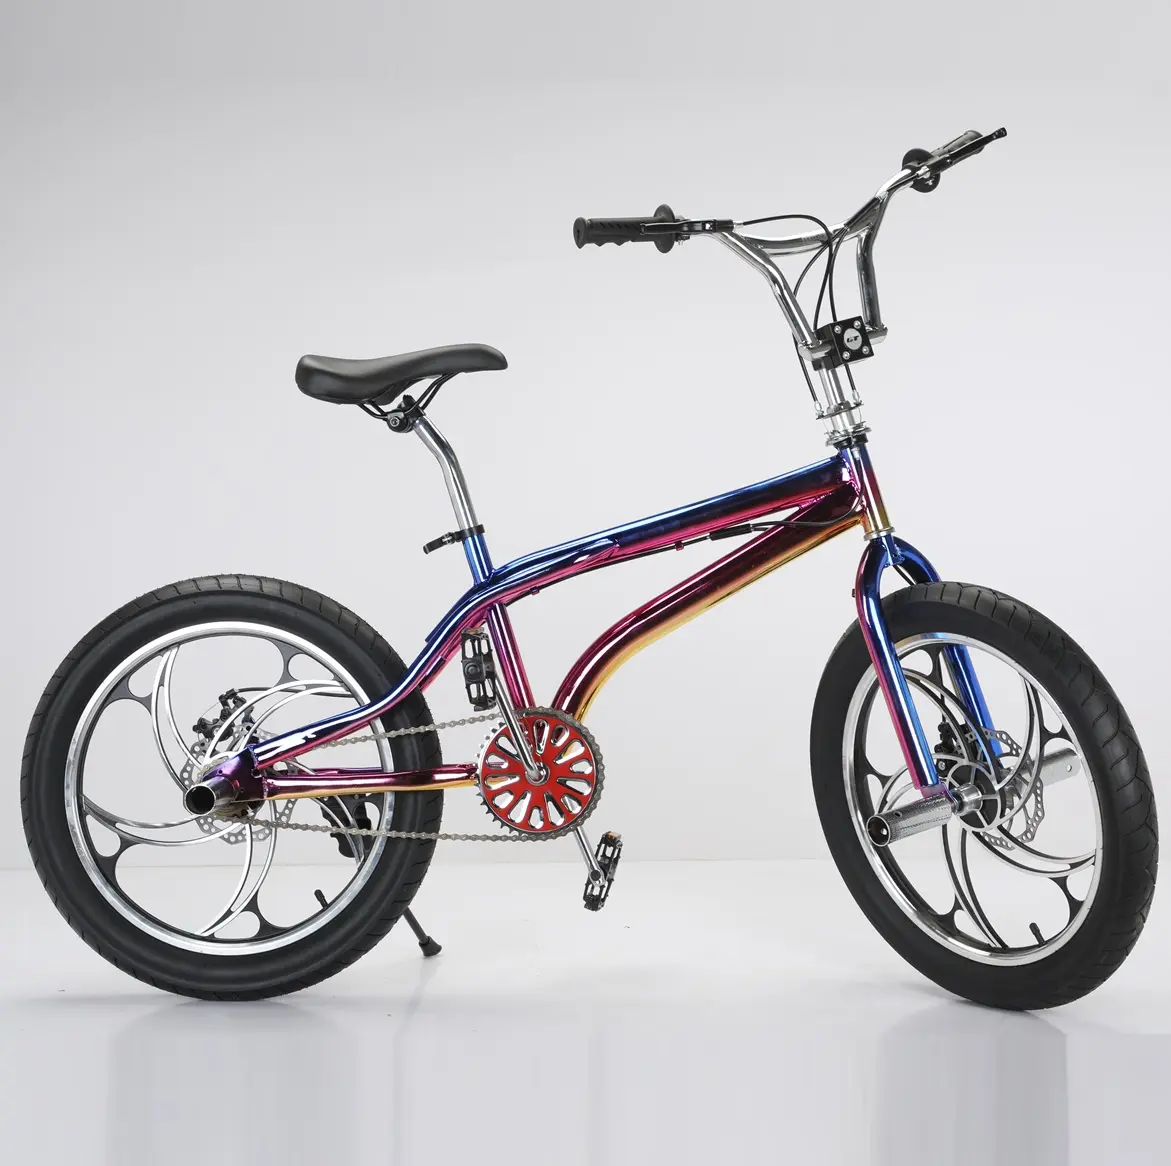 Factory All Kinds Of Price Bmx Bike For Sale / Freestyle 20 Inch Mini Bmx Bicycle /wholesale Cheap Original Bmx